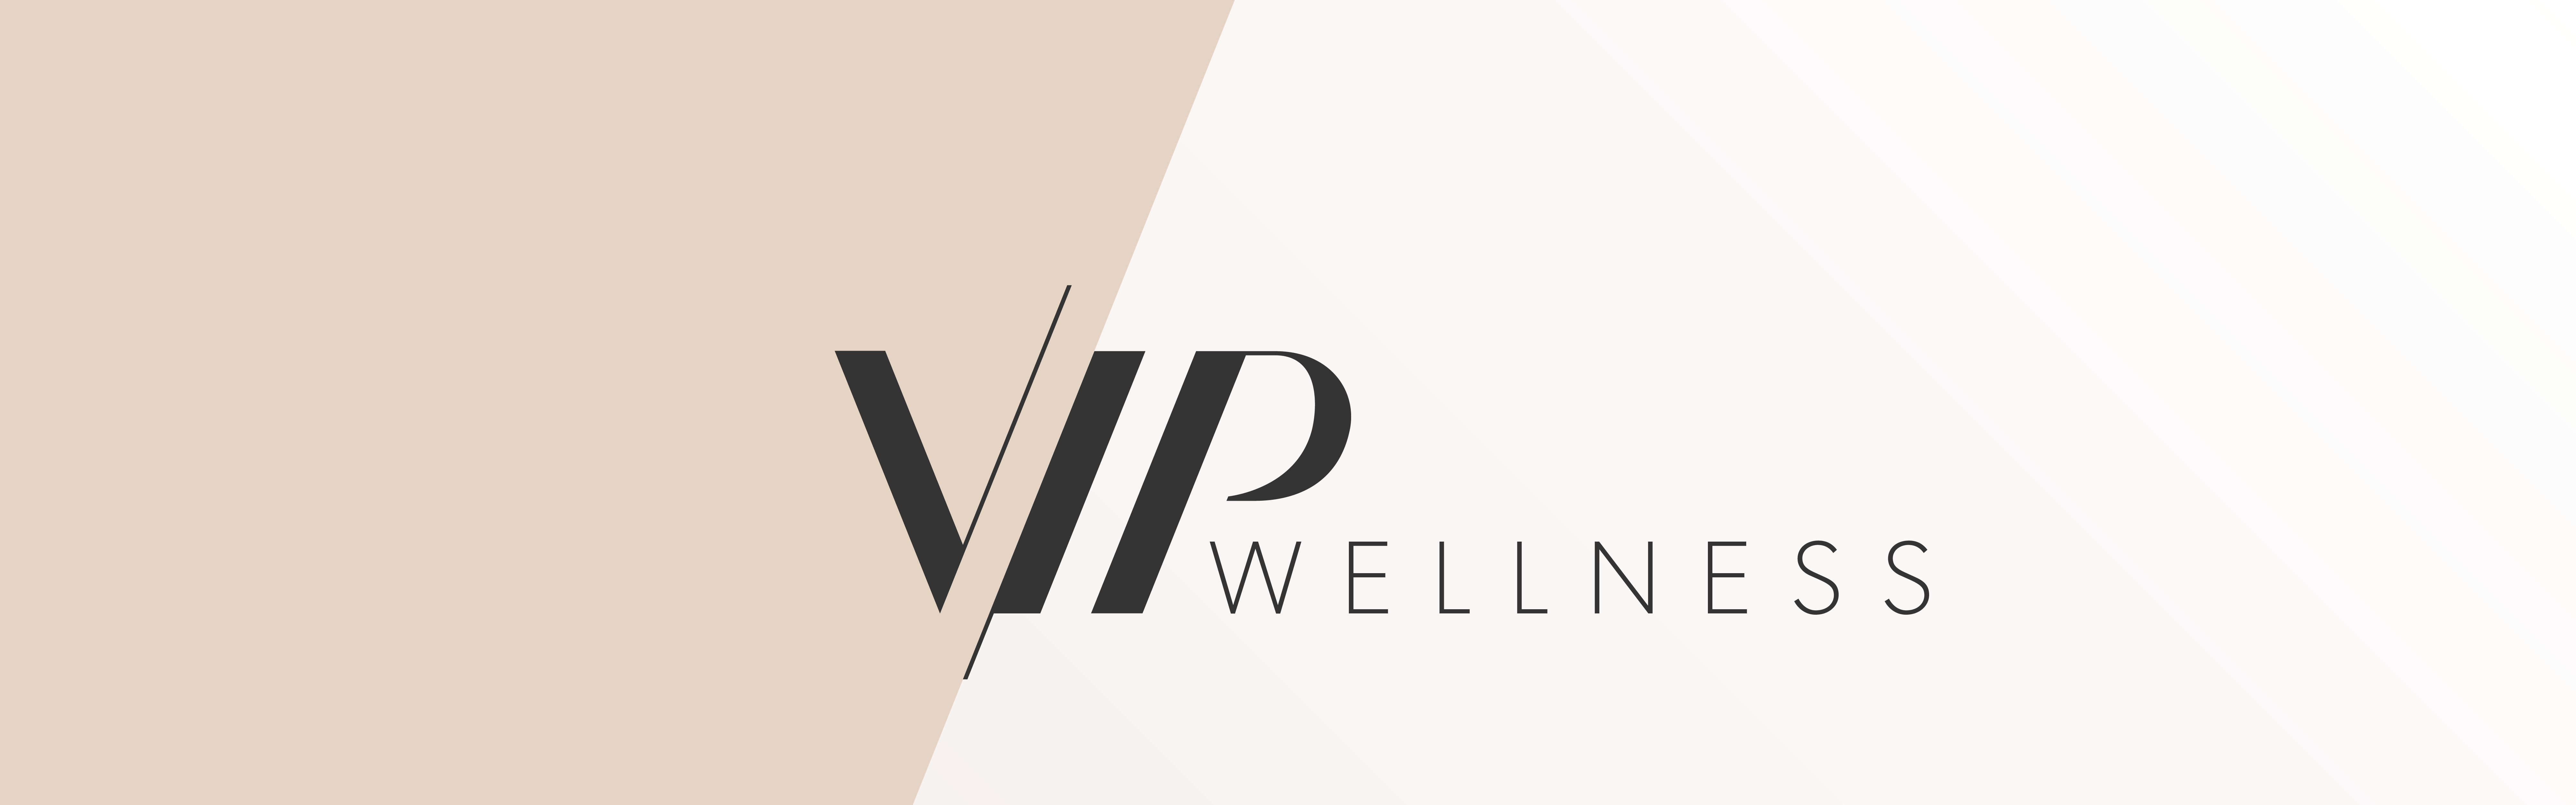 Logo design for "VIP Wellness" featuring bold, stylized letters with a contrasting color background divided by a diagonal line.